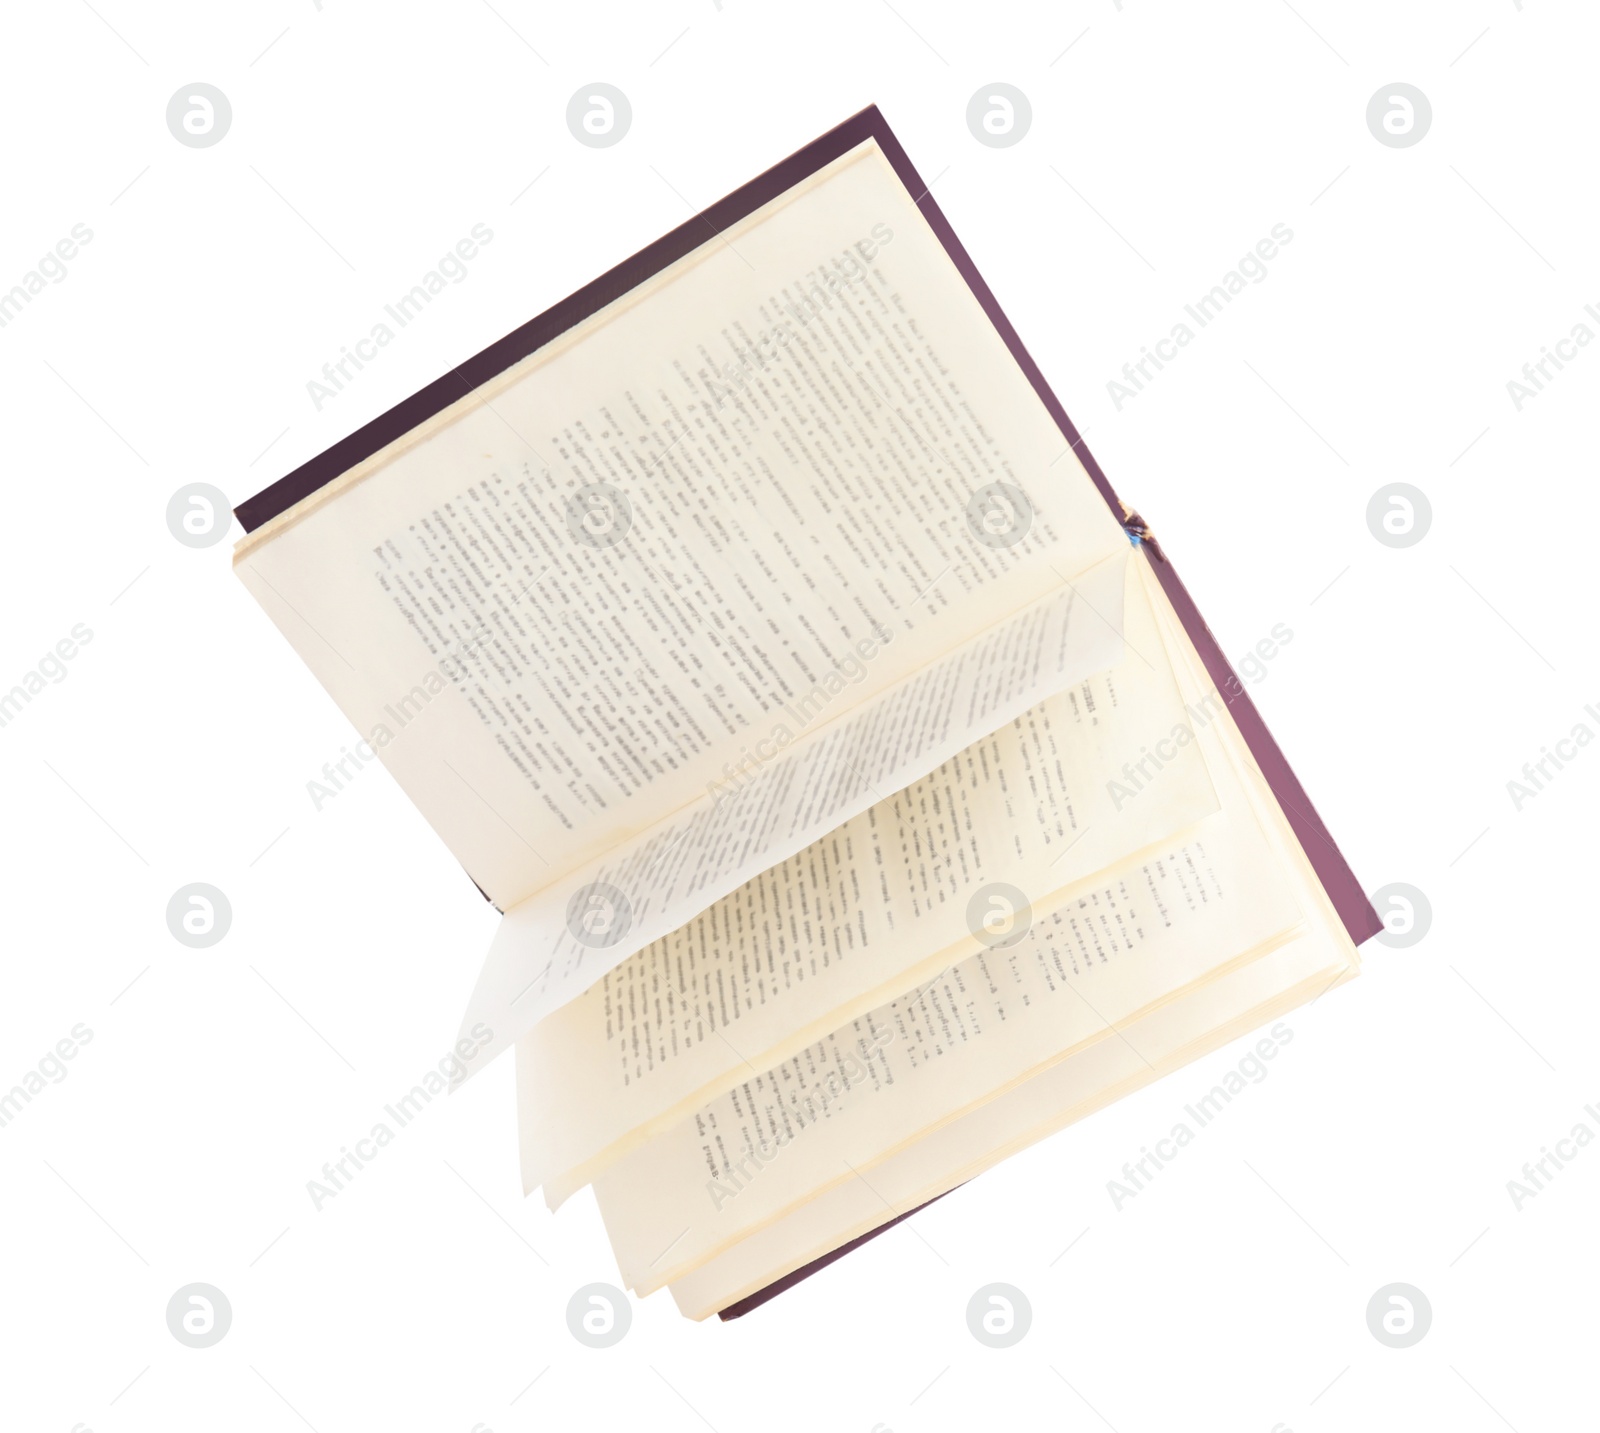 Photo of Open book with hard cover isolated on white